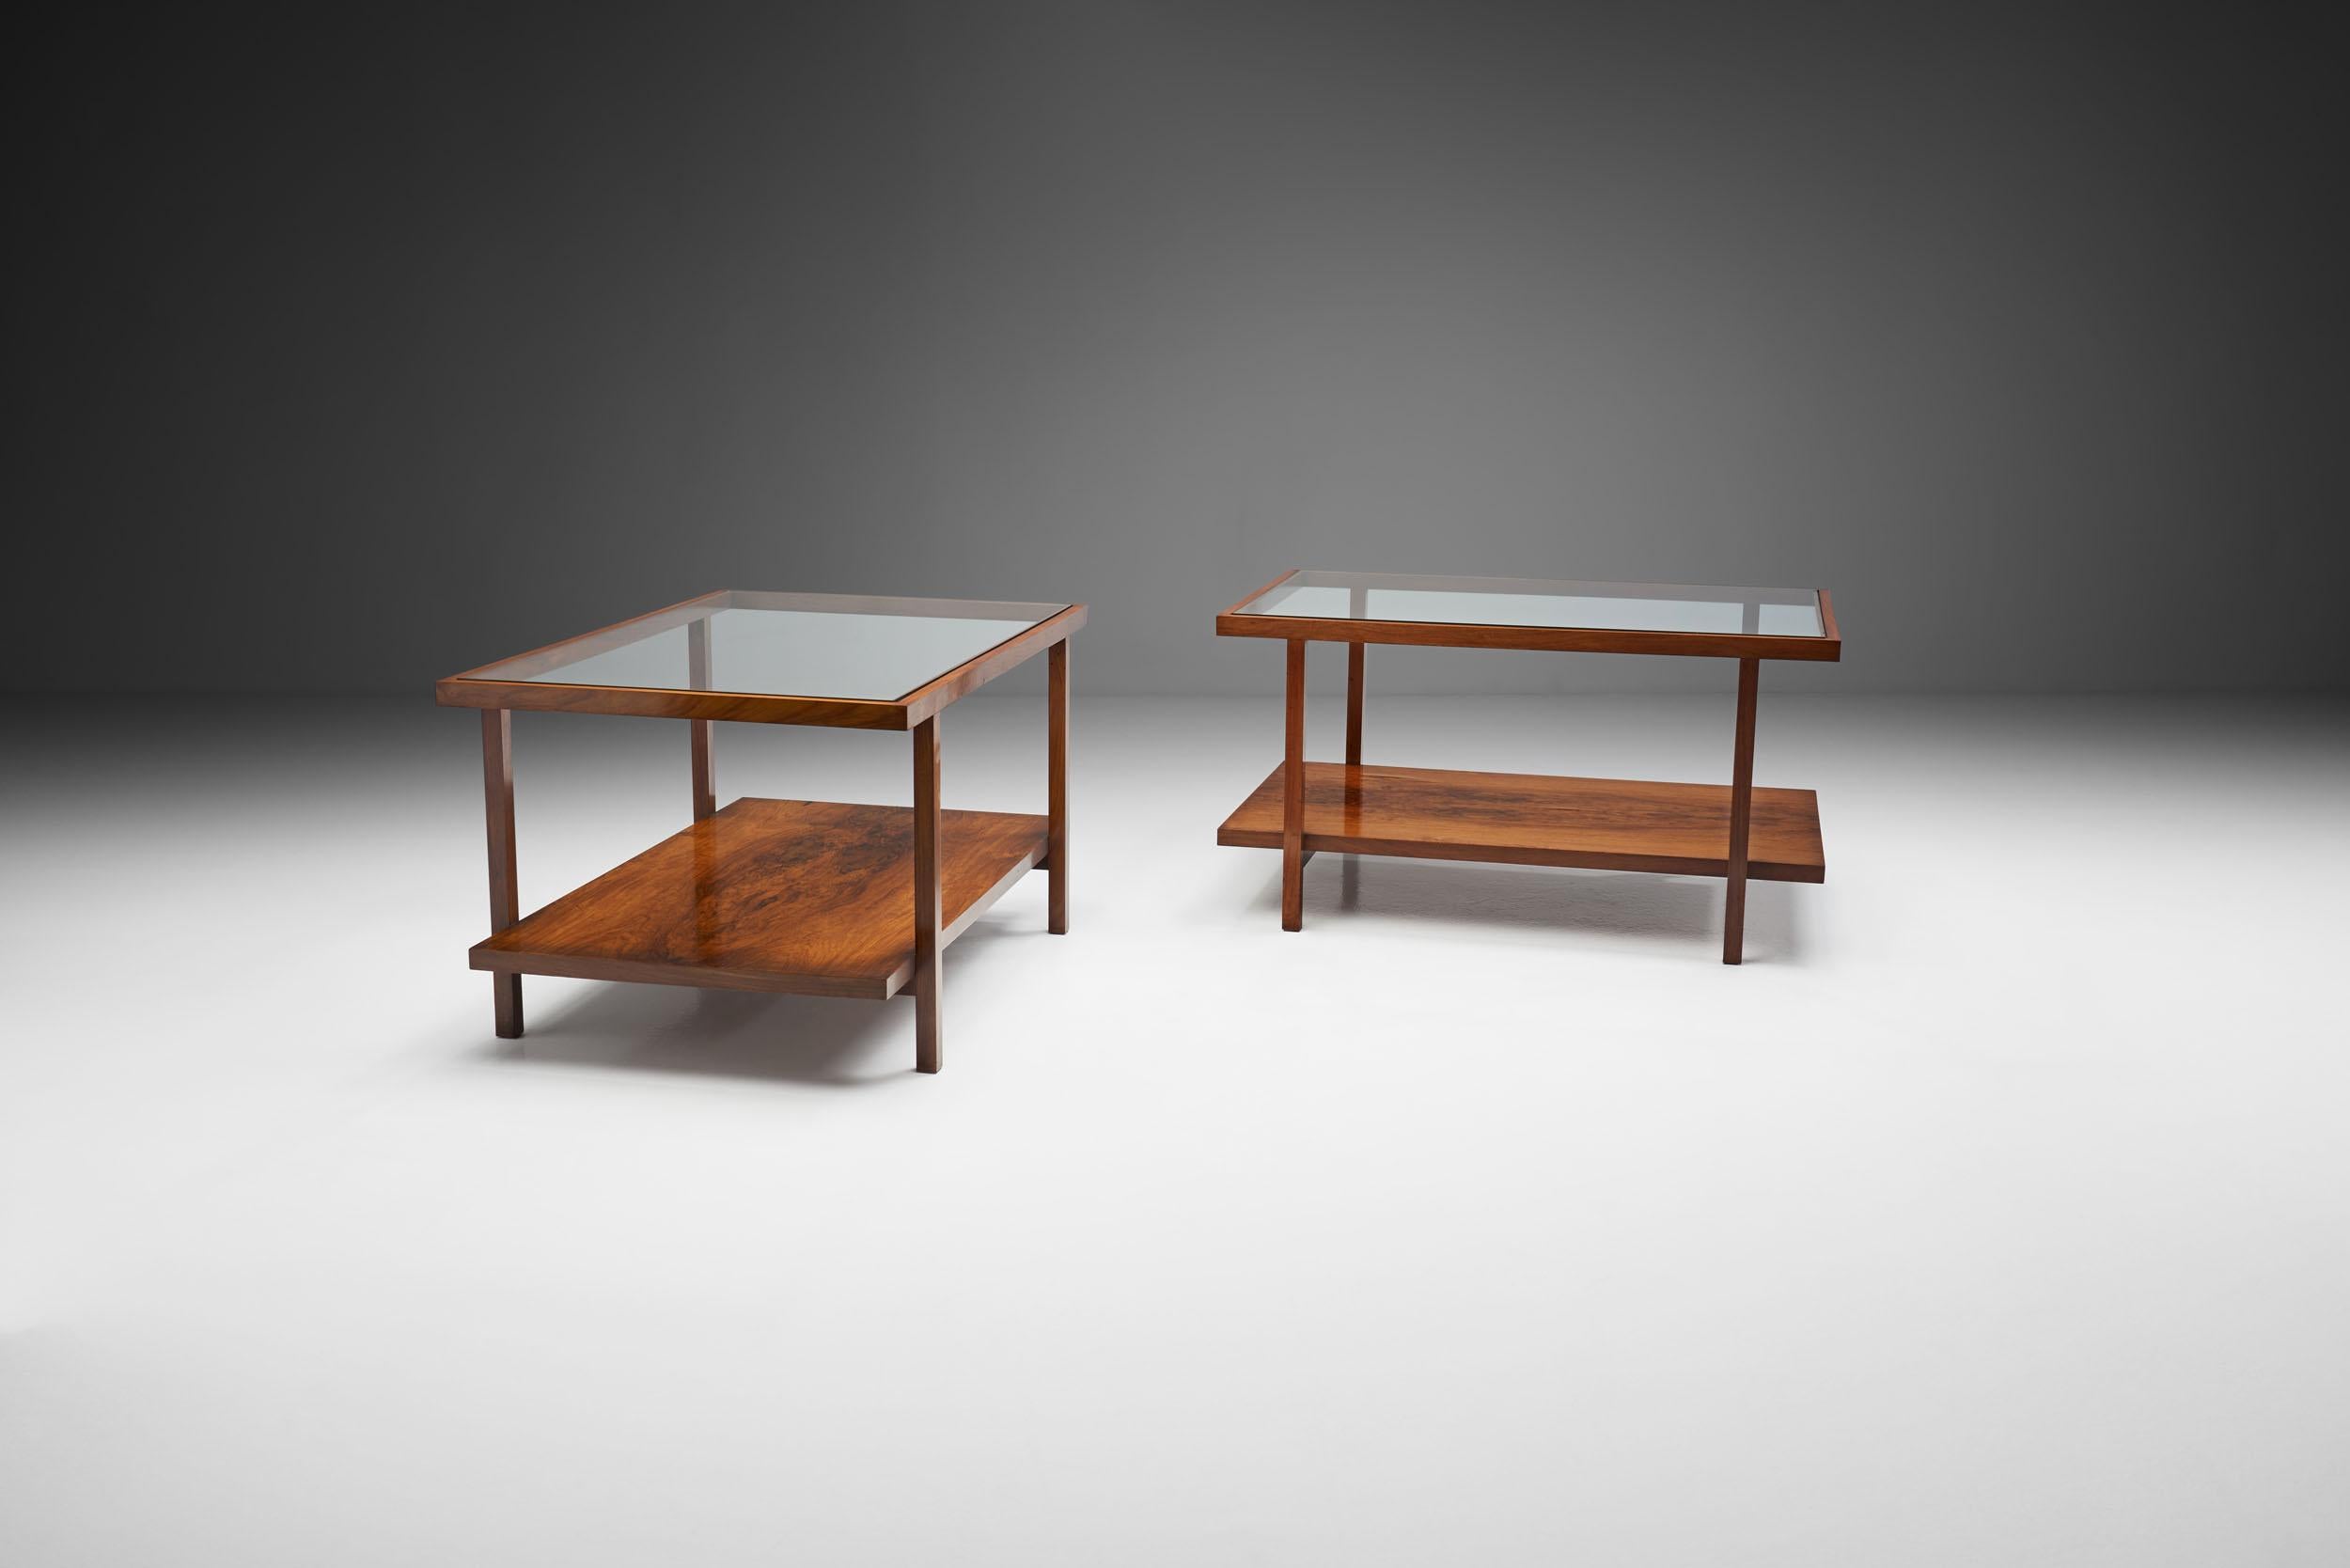 Brazilian A Pair of Rectangular Branco and Preto Side Tables in Caviuna Wood, Brazil 1960s For Sale